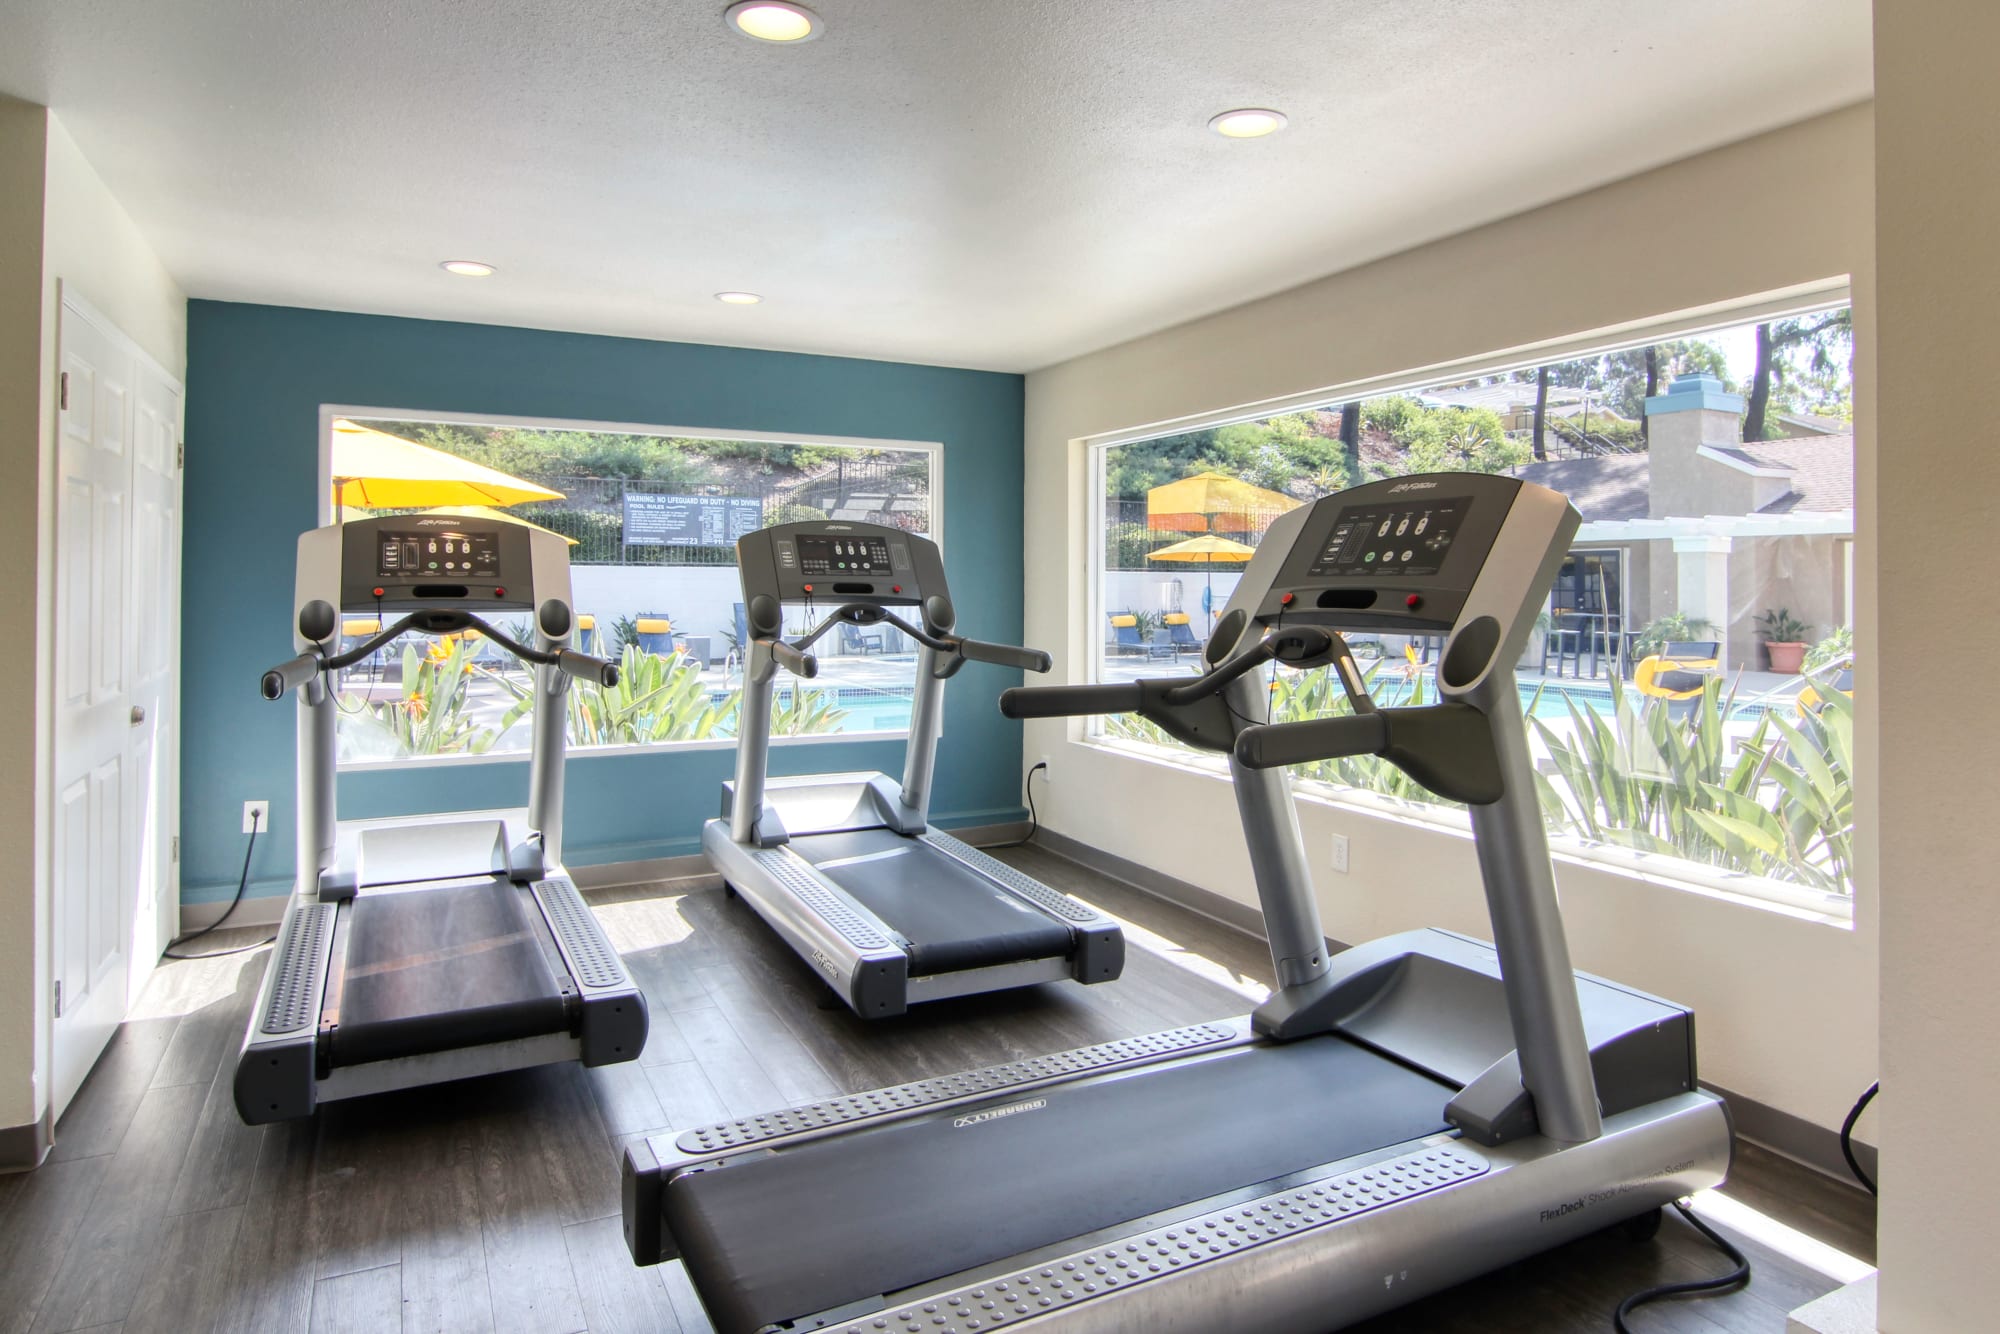 Newly renovated fitness center with large windows that look out to pool area at Lakeview Village Apartments in Spring Valley, California